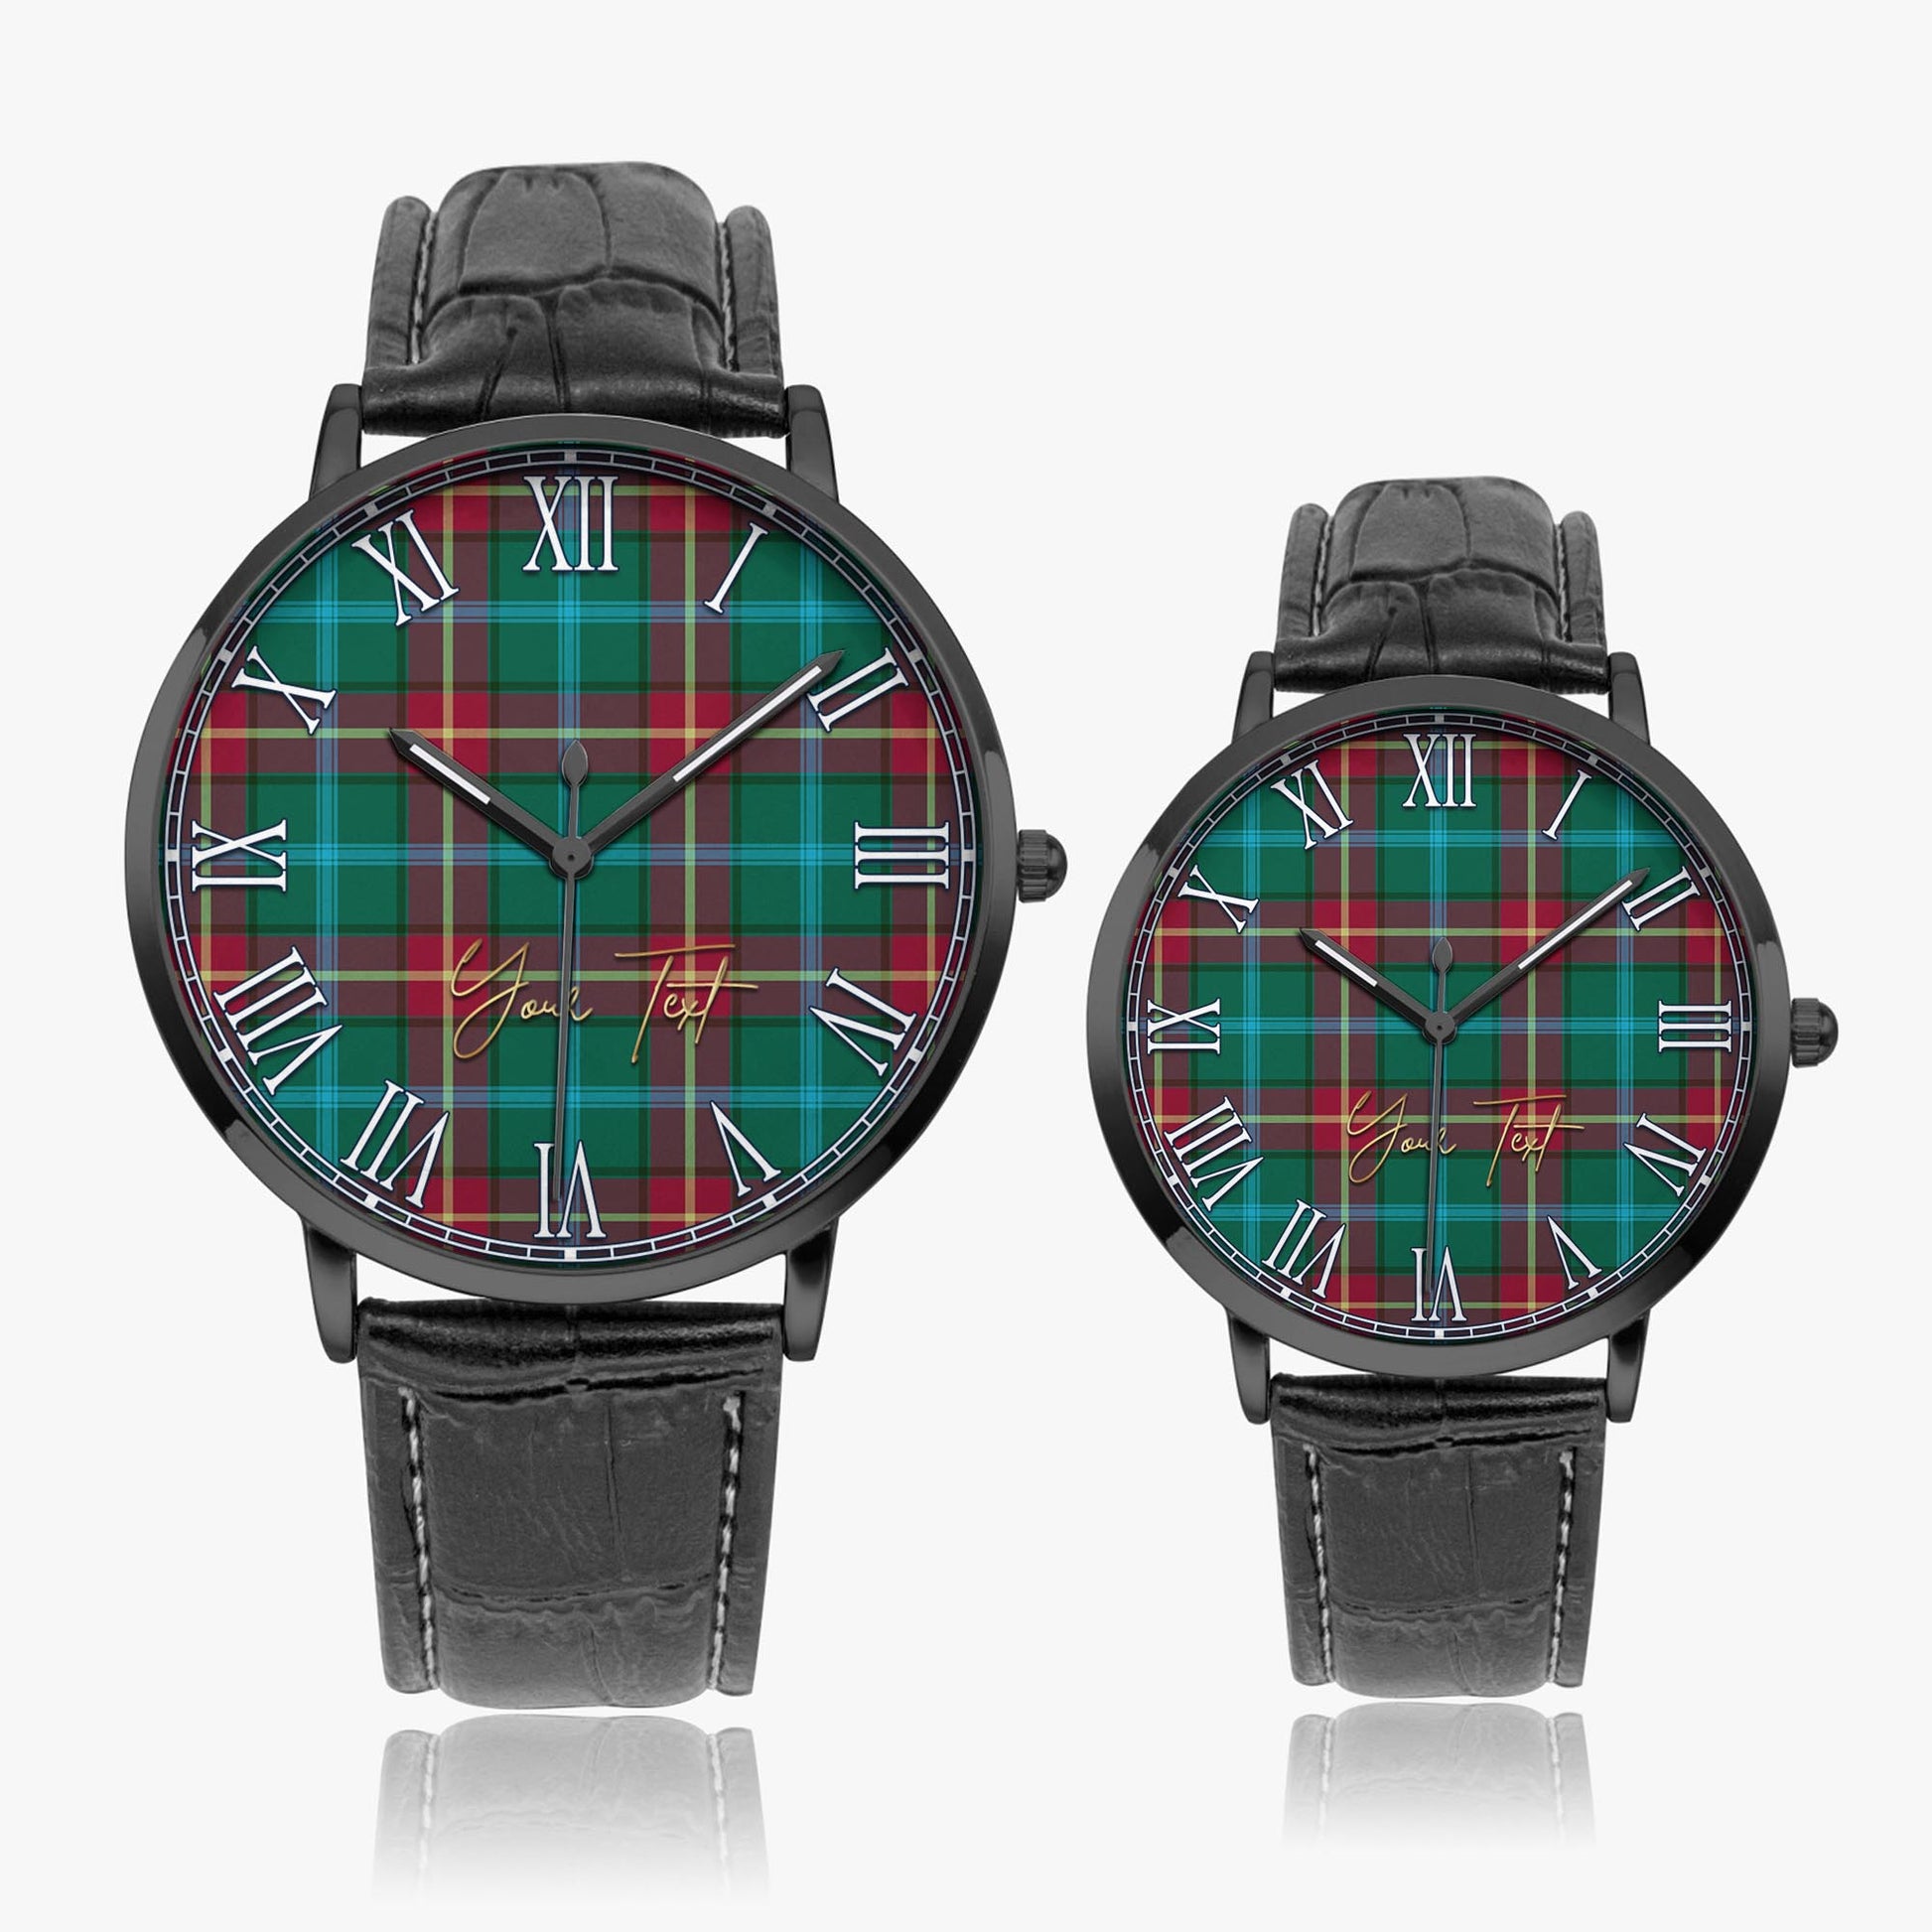 Manitoba Province Canada Tartan Personalized Your Text Leather Trap Quartz Watch Ultra Thin Black Case With Black Leather Strap - Tartanvibesclothing